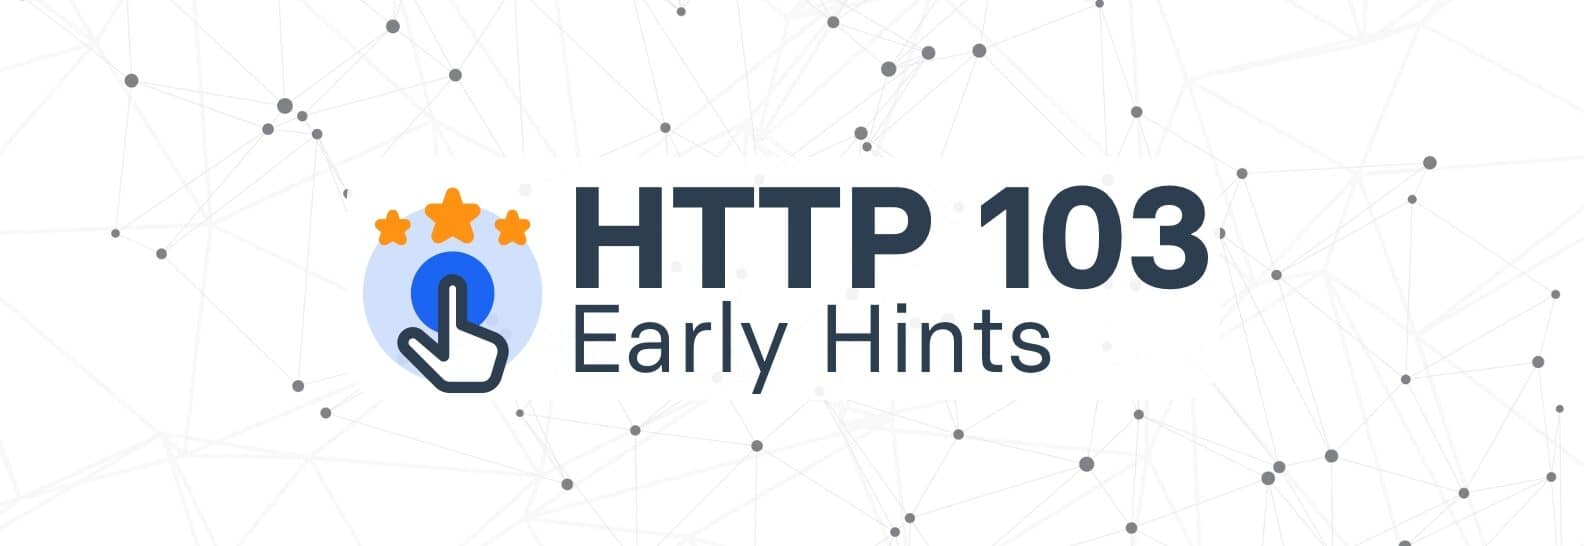 HTTP 103 Early Hints